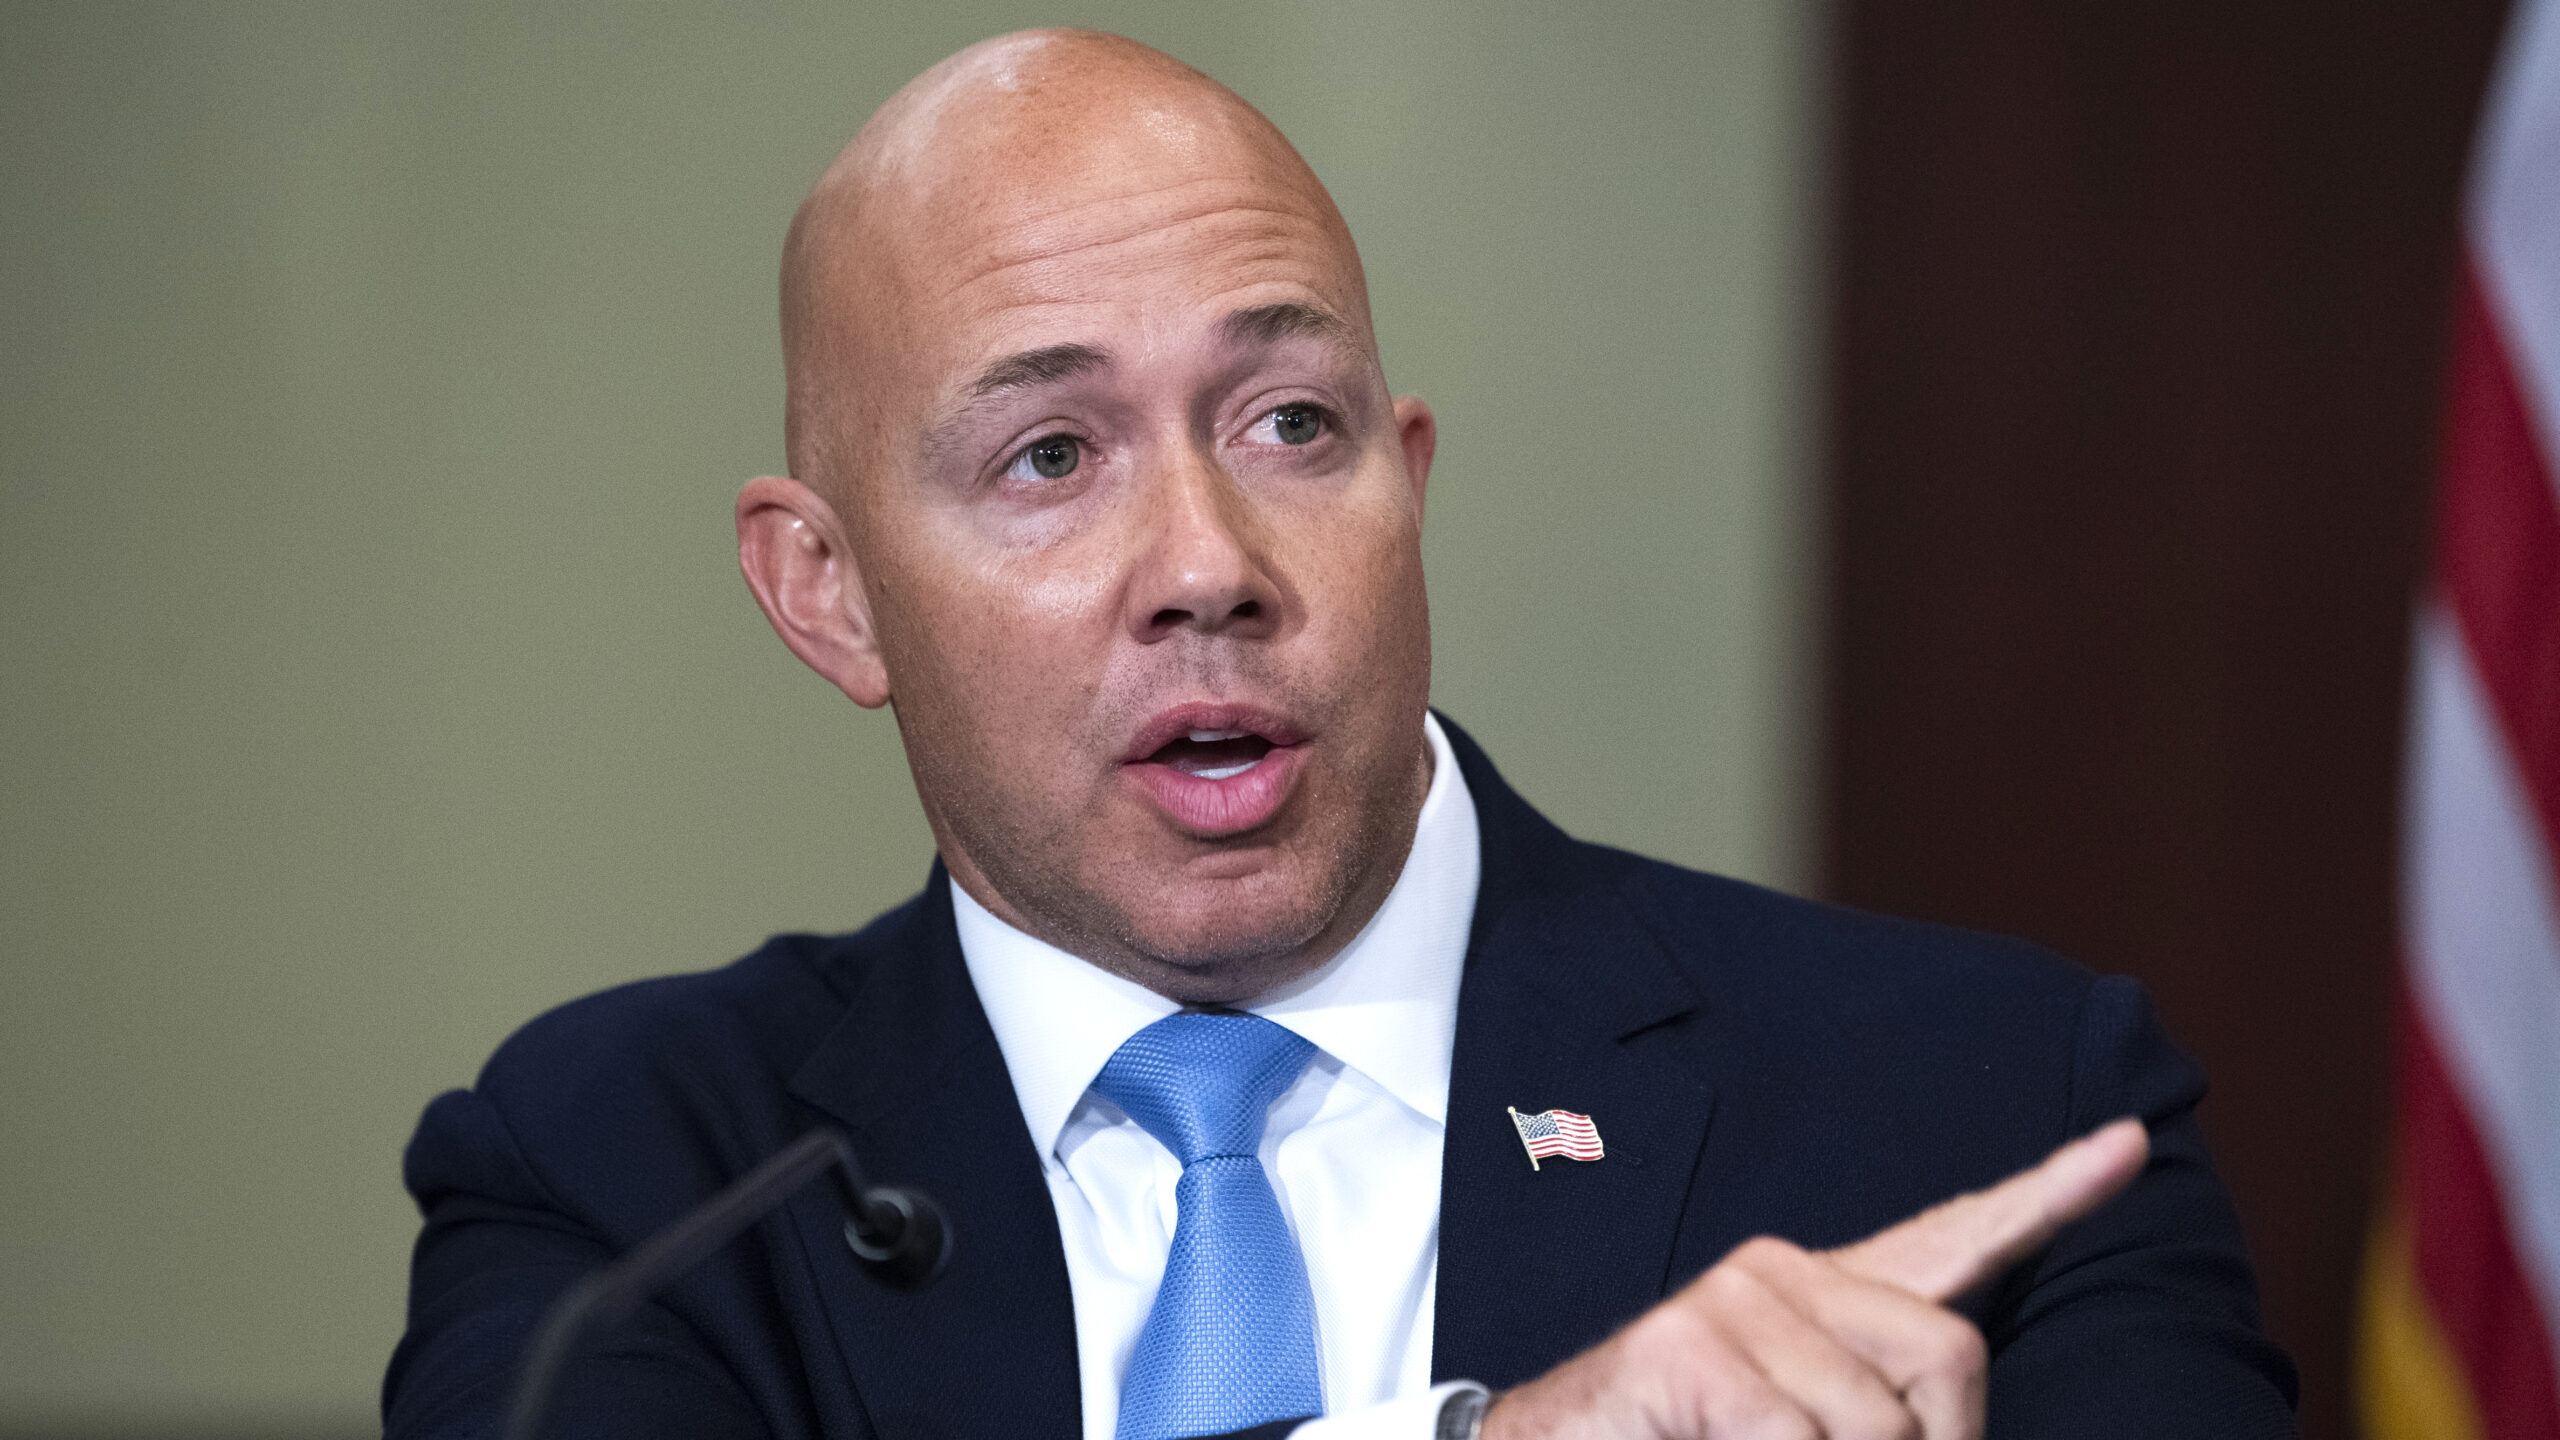 WATCH: Brian Mast Torches Far-Left Activists Over Hamas